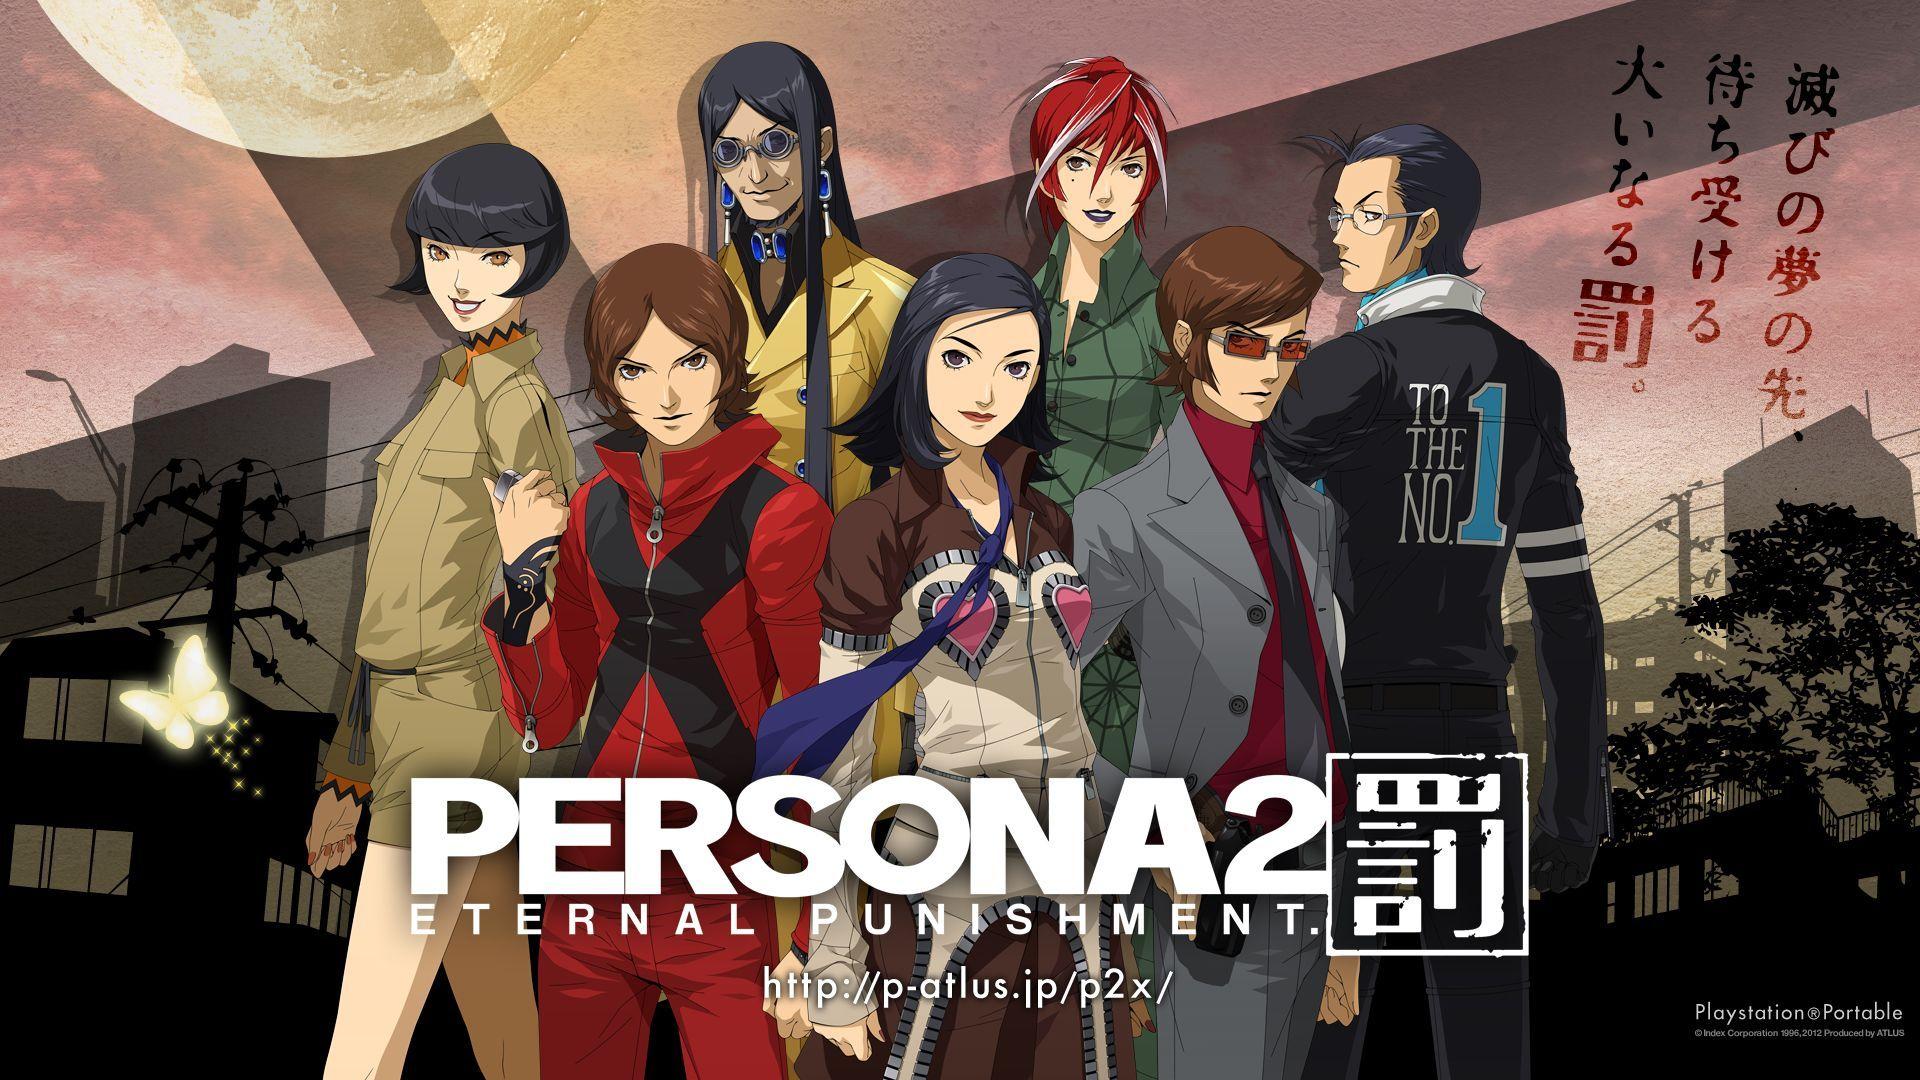 Persona 2 Eternal Punishment. All Aboard The Persona Hype Train